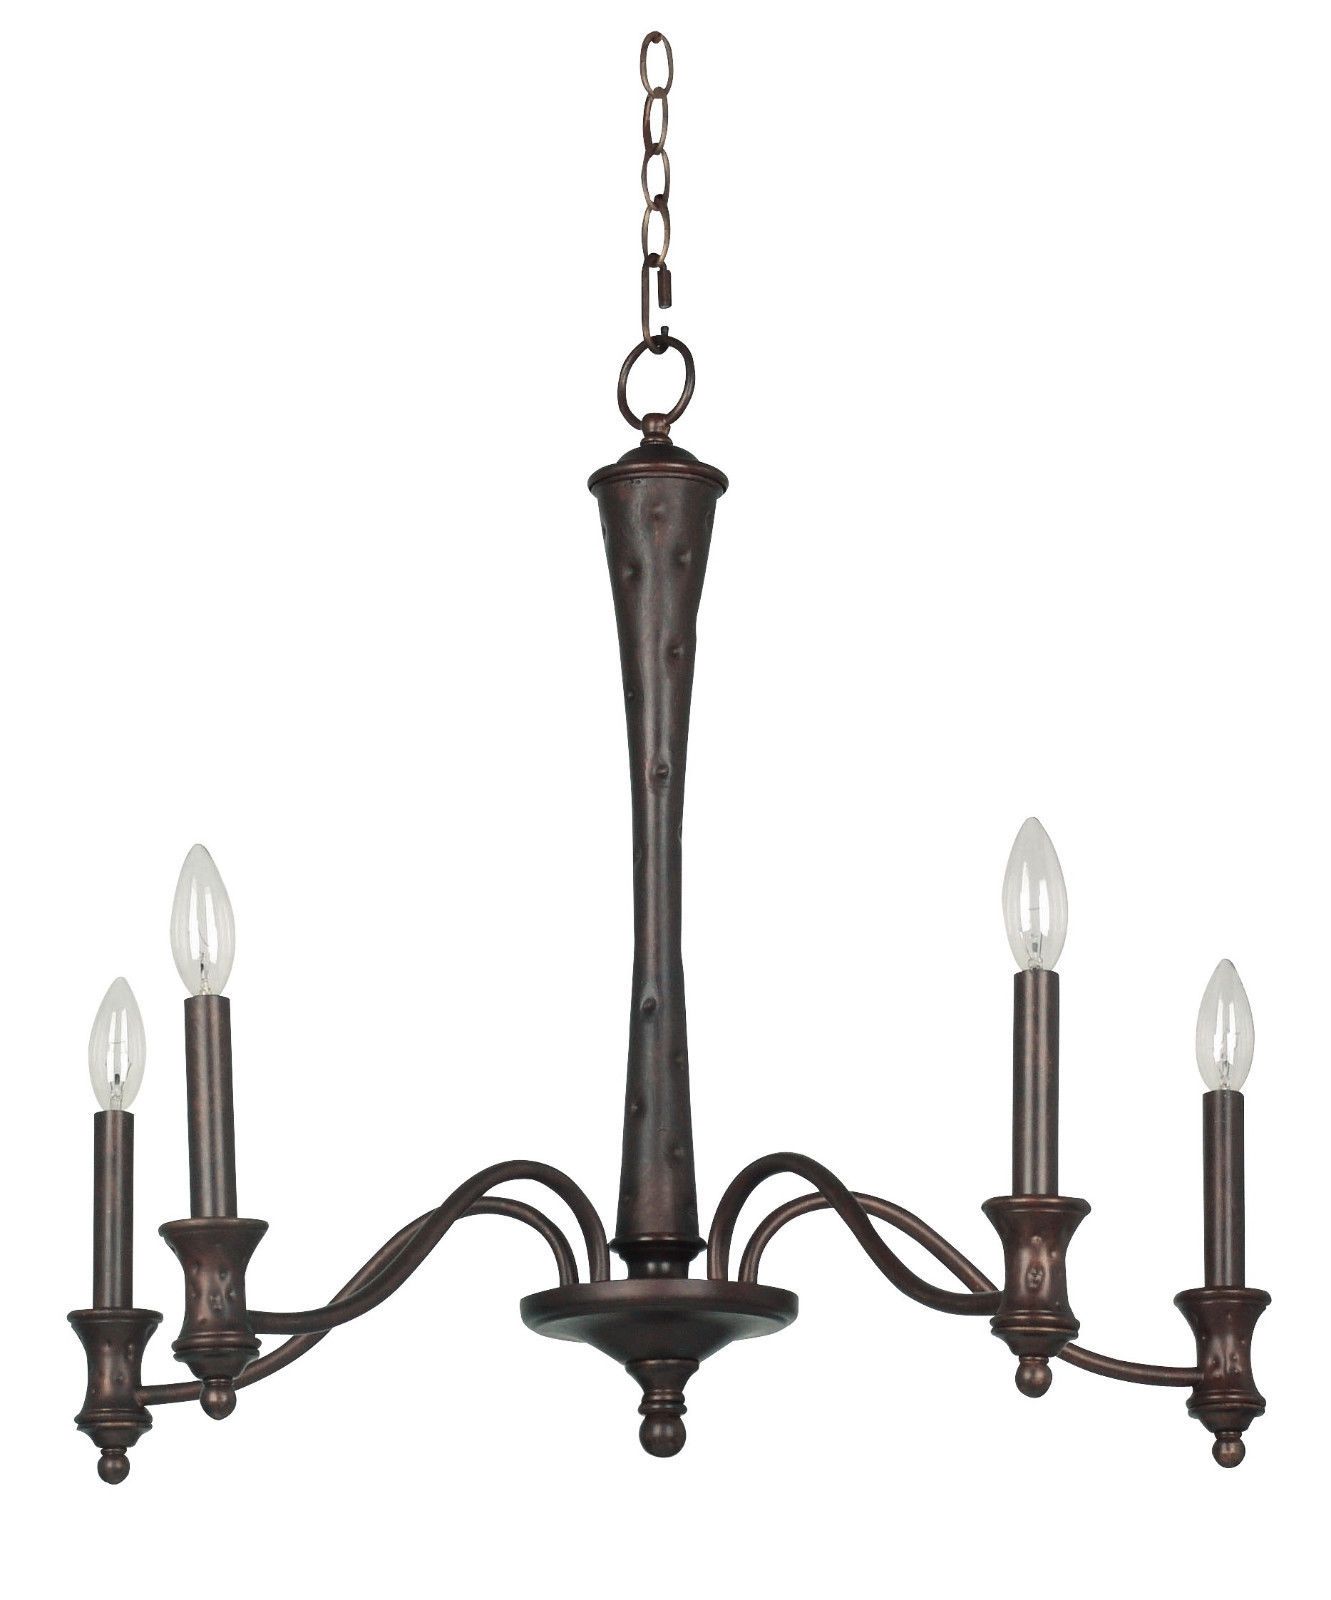 Gothic Medieval Forged Iron Chandelier 25 Lamp Shade Pro Regarding Black Gothic Chandelier (View 8 of 12)